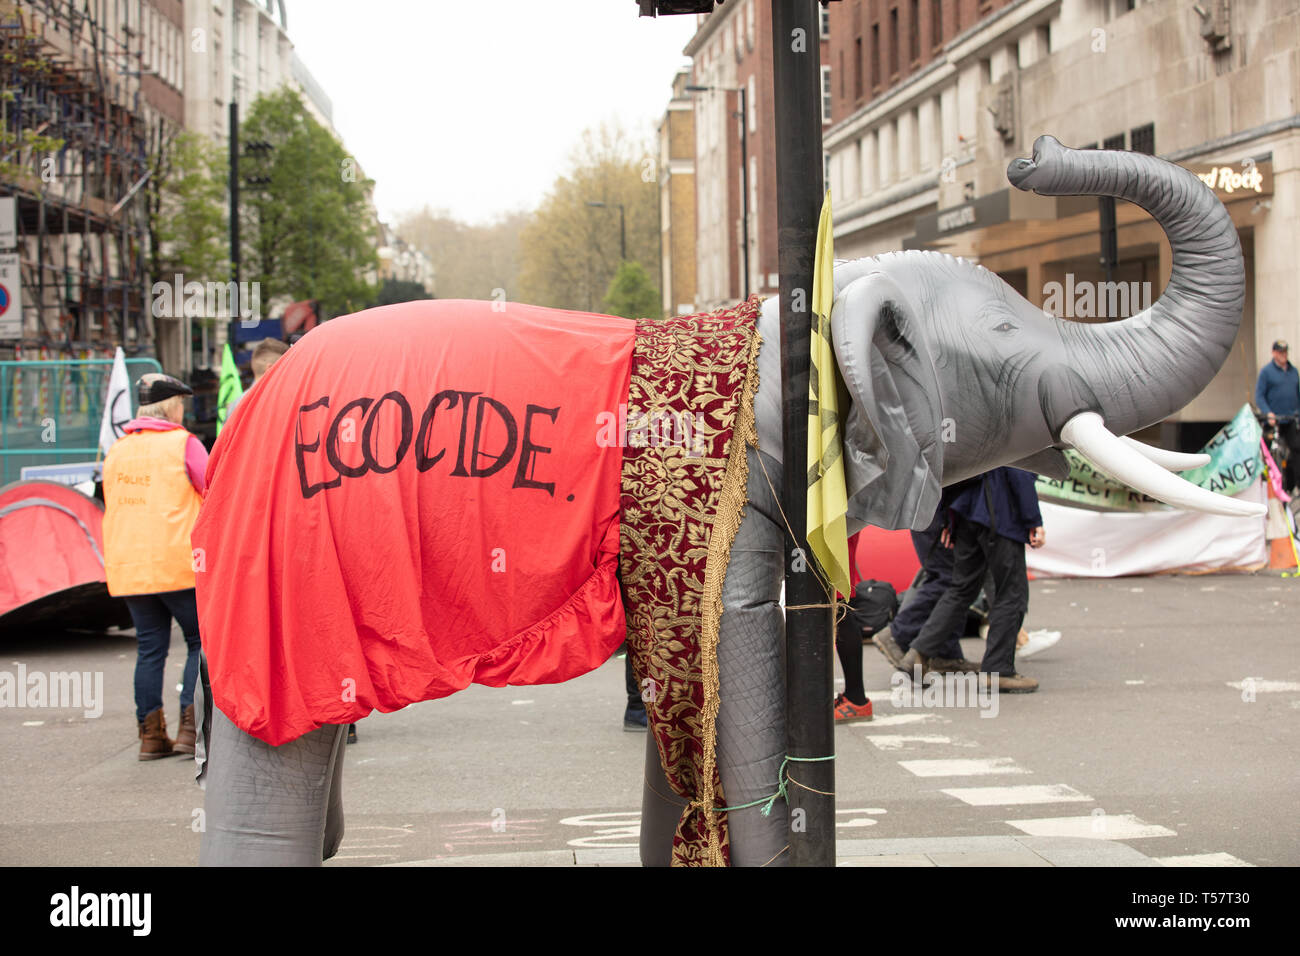 An elephant figure used during an Extinction Rebellion demonstration  seen draped with a red cloth with the word ecocide written on it. Stock Photo